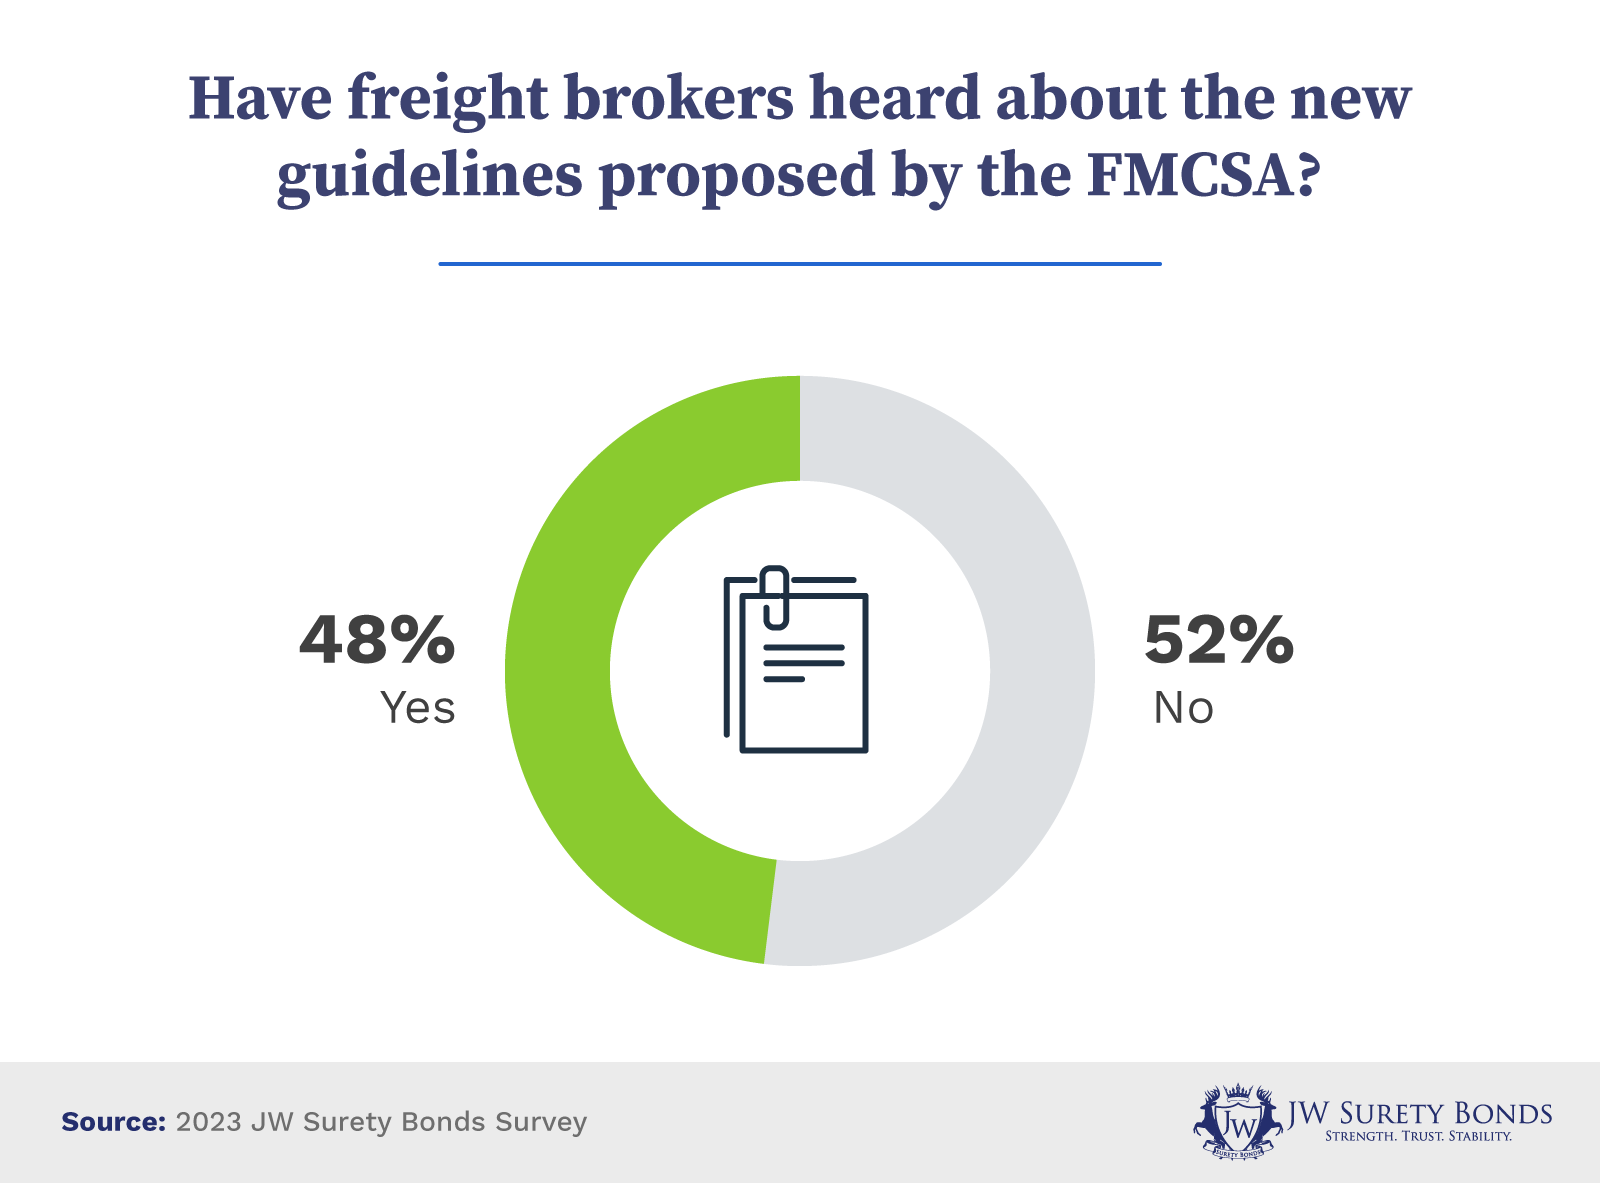 48% of freight brokers have heard about the new guidelines proposed by the FMCSA.